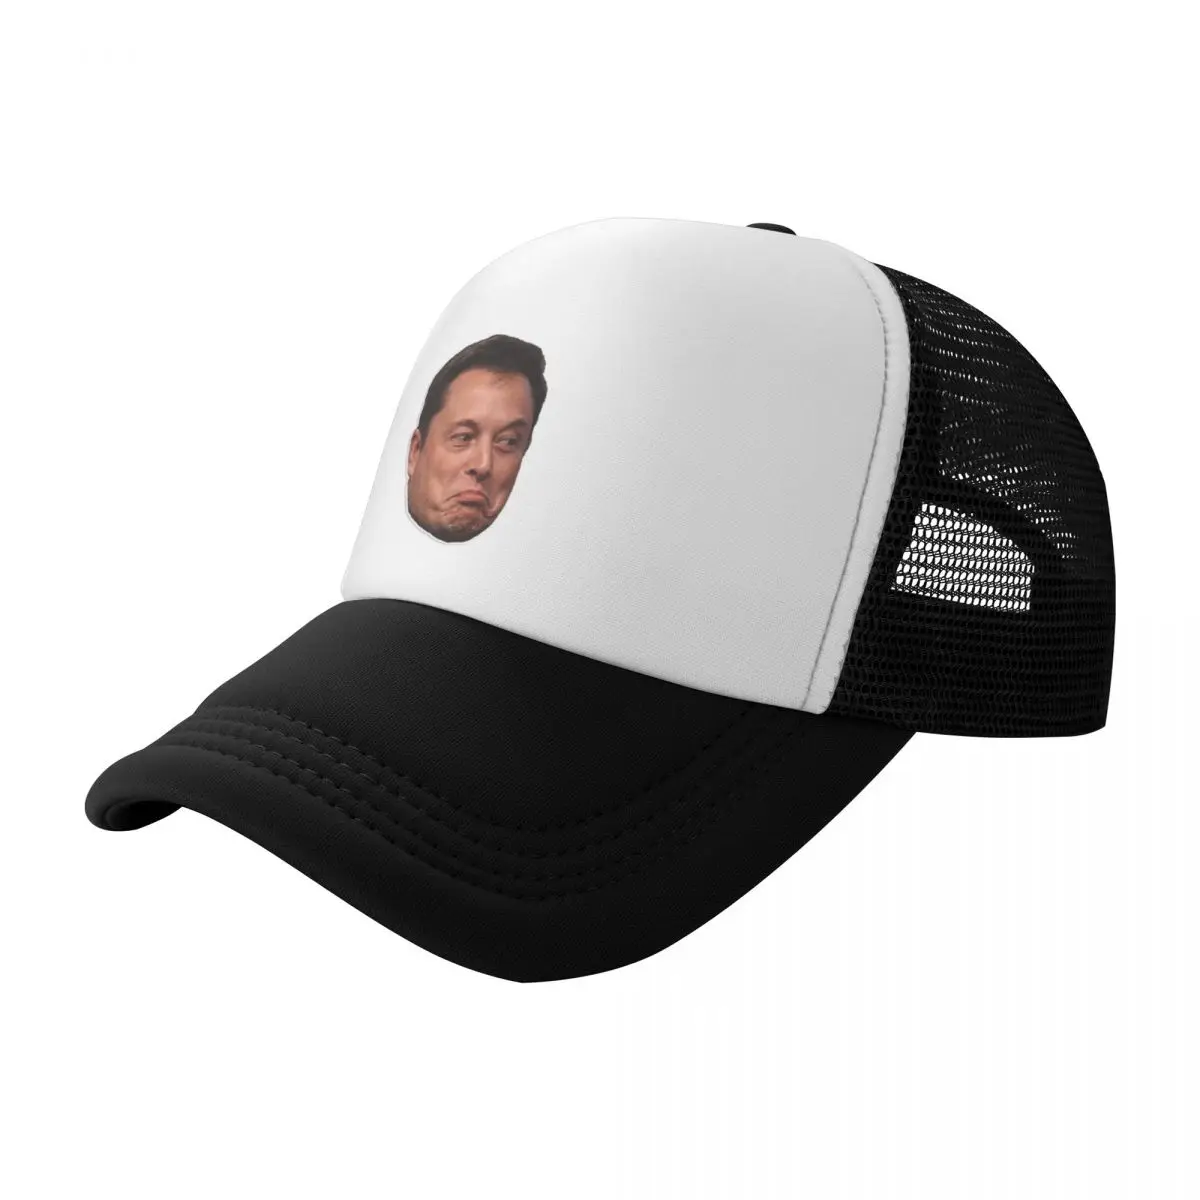 

Elon Musk Face Looking Hilarious - Thanksgiving, Christmas And Birthday Party Gift Ideas for Elon Musk Lovers and Baseball Cap